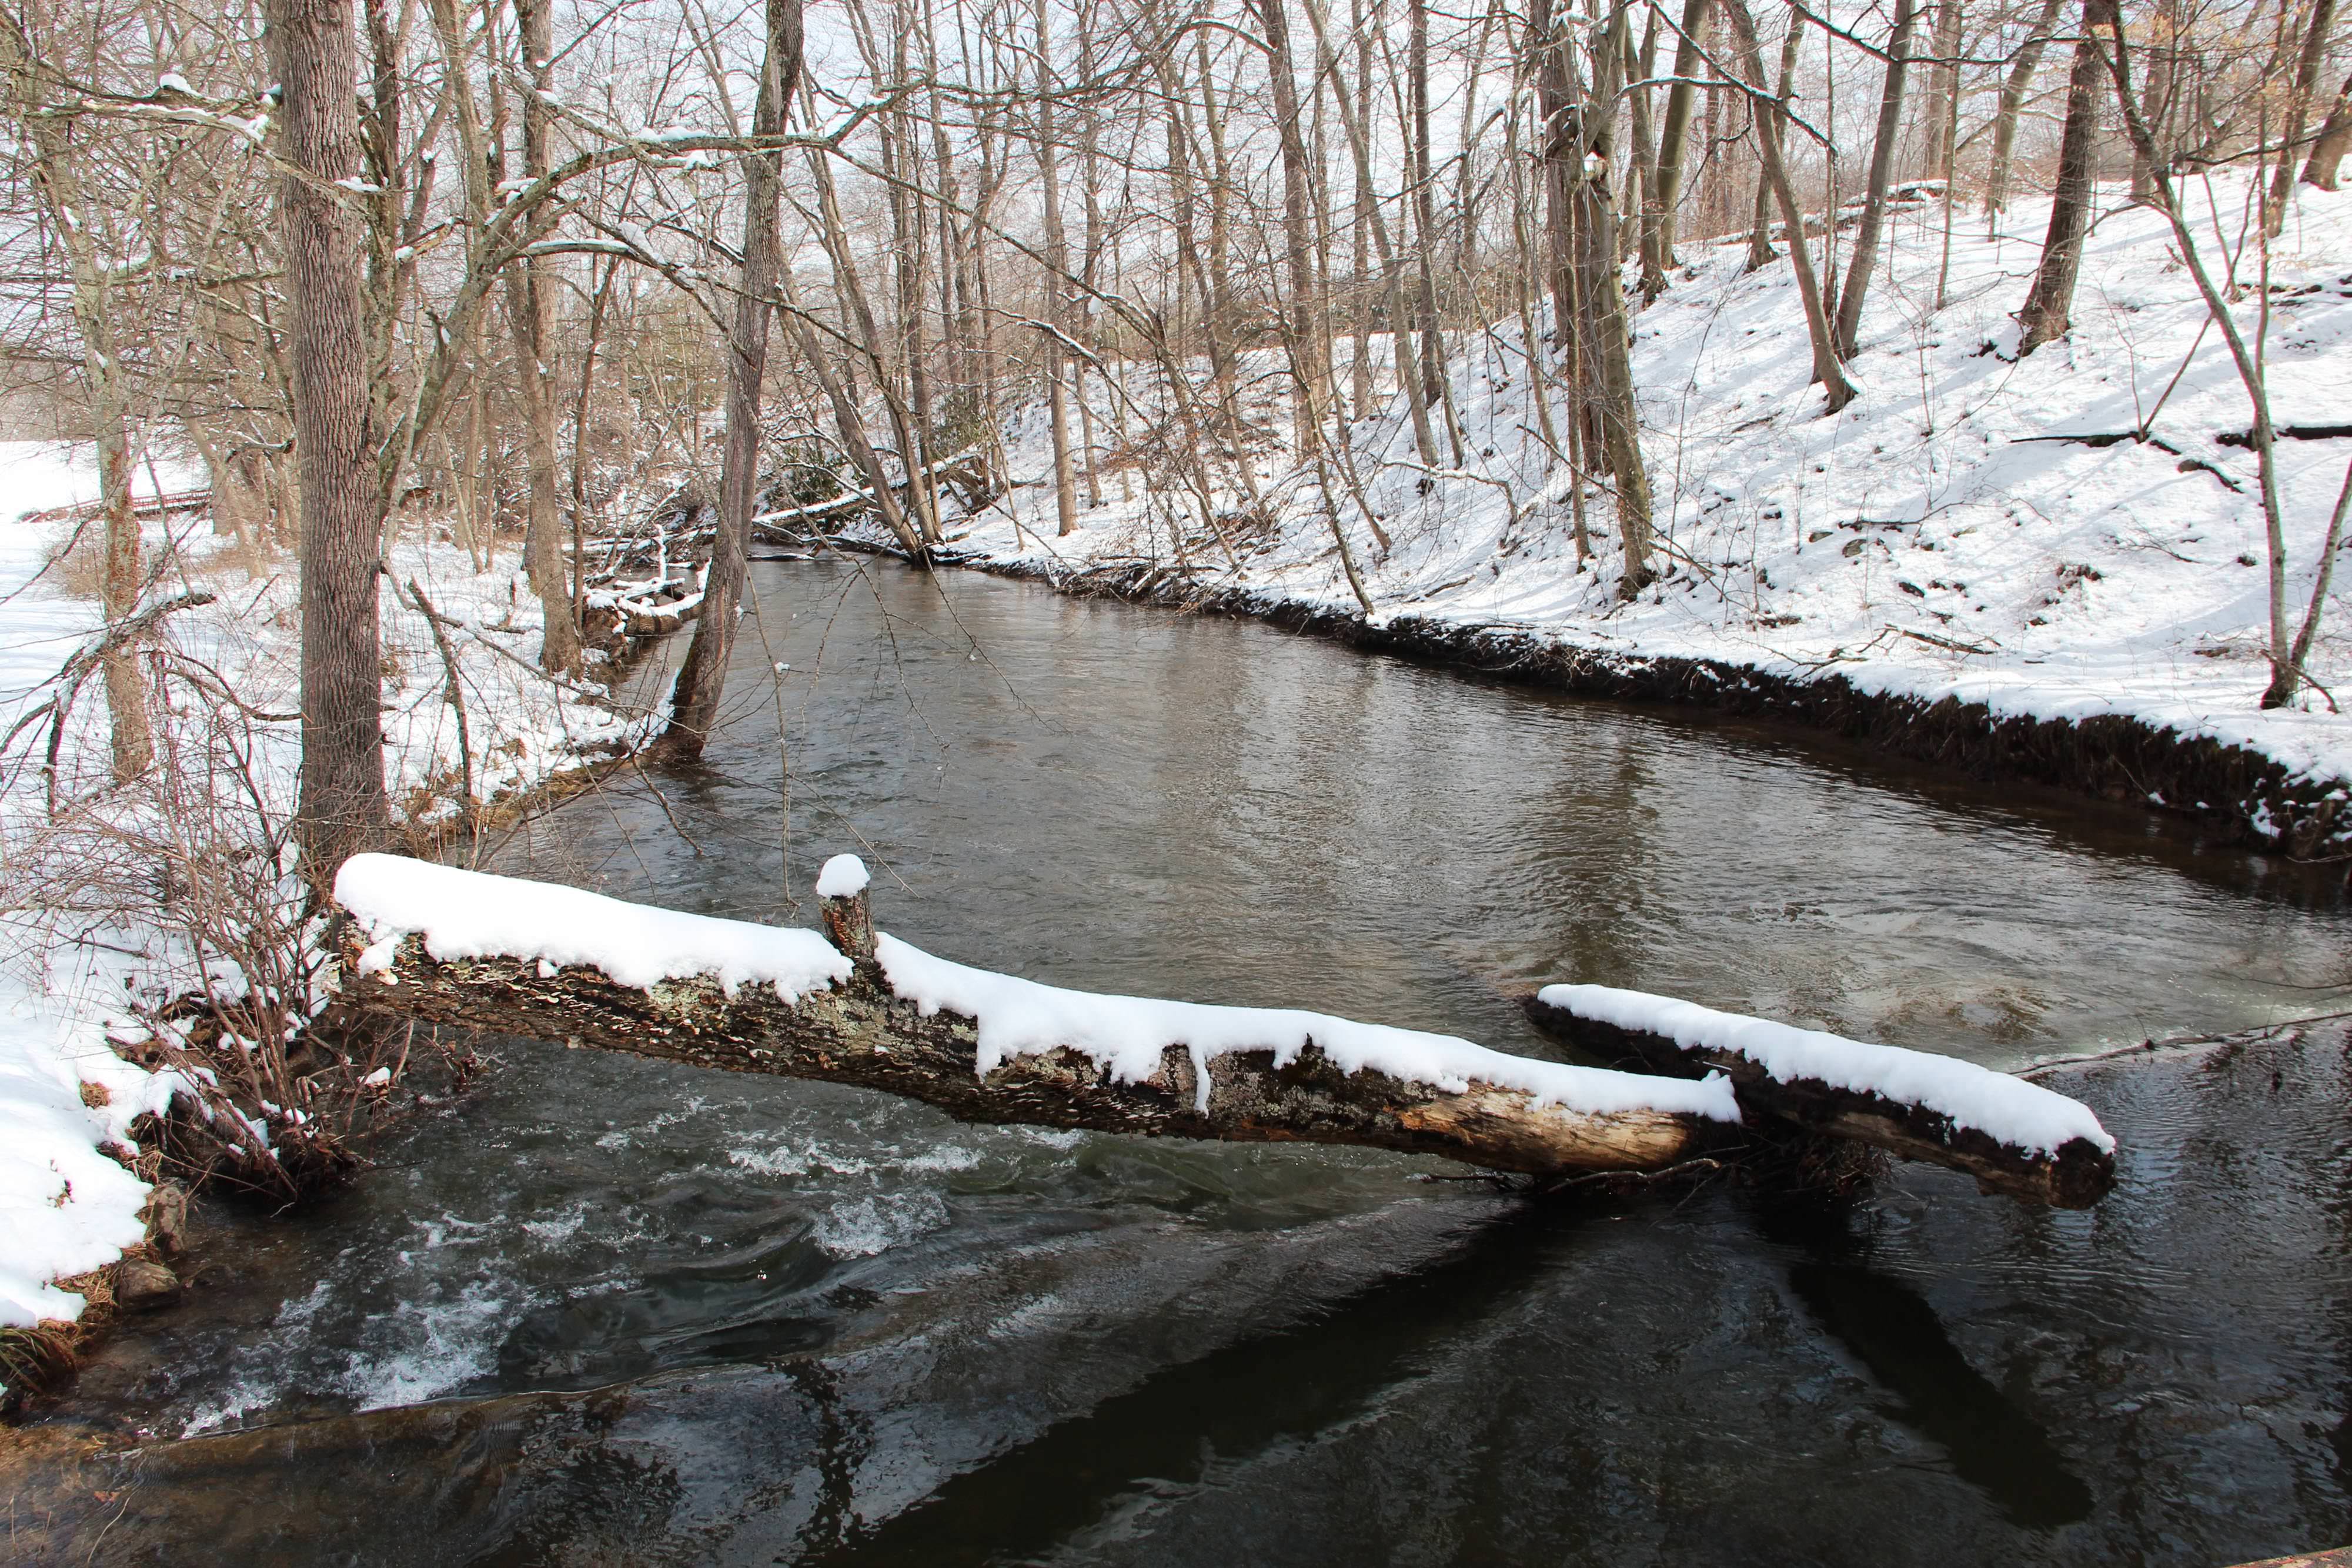 A wide stream flows between snow-covered banks. A fallen log rests at an angle with one end in the water.